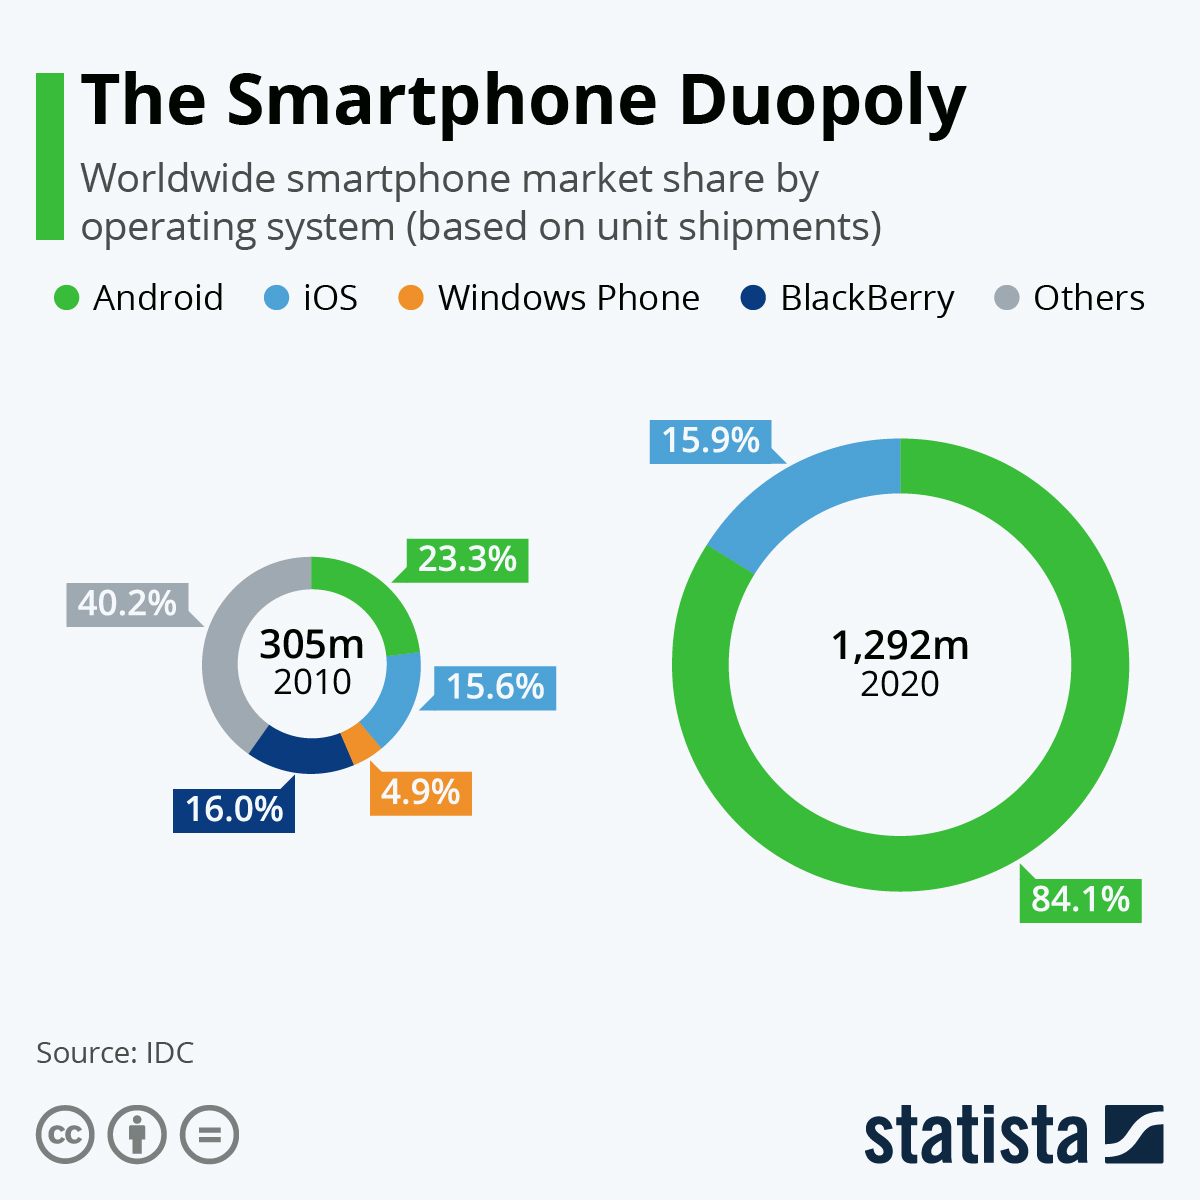 The Smartphone Duopoly